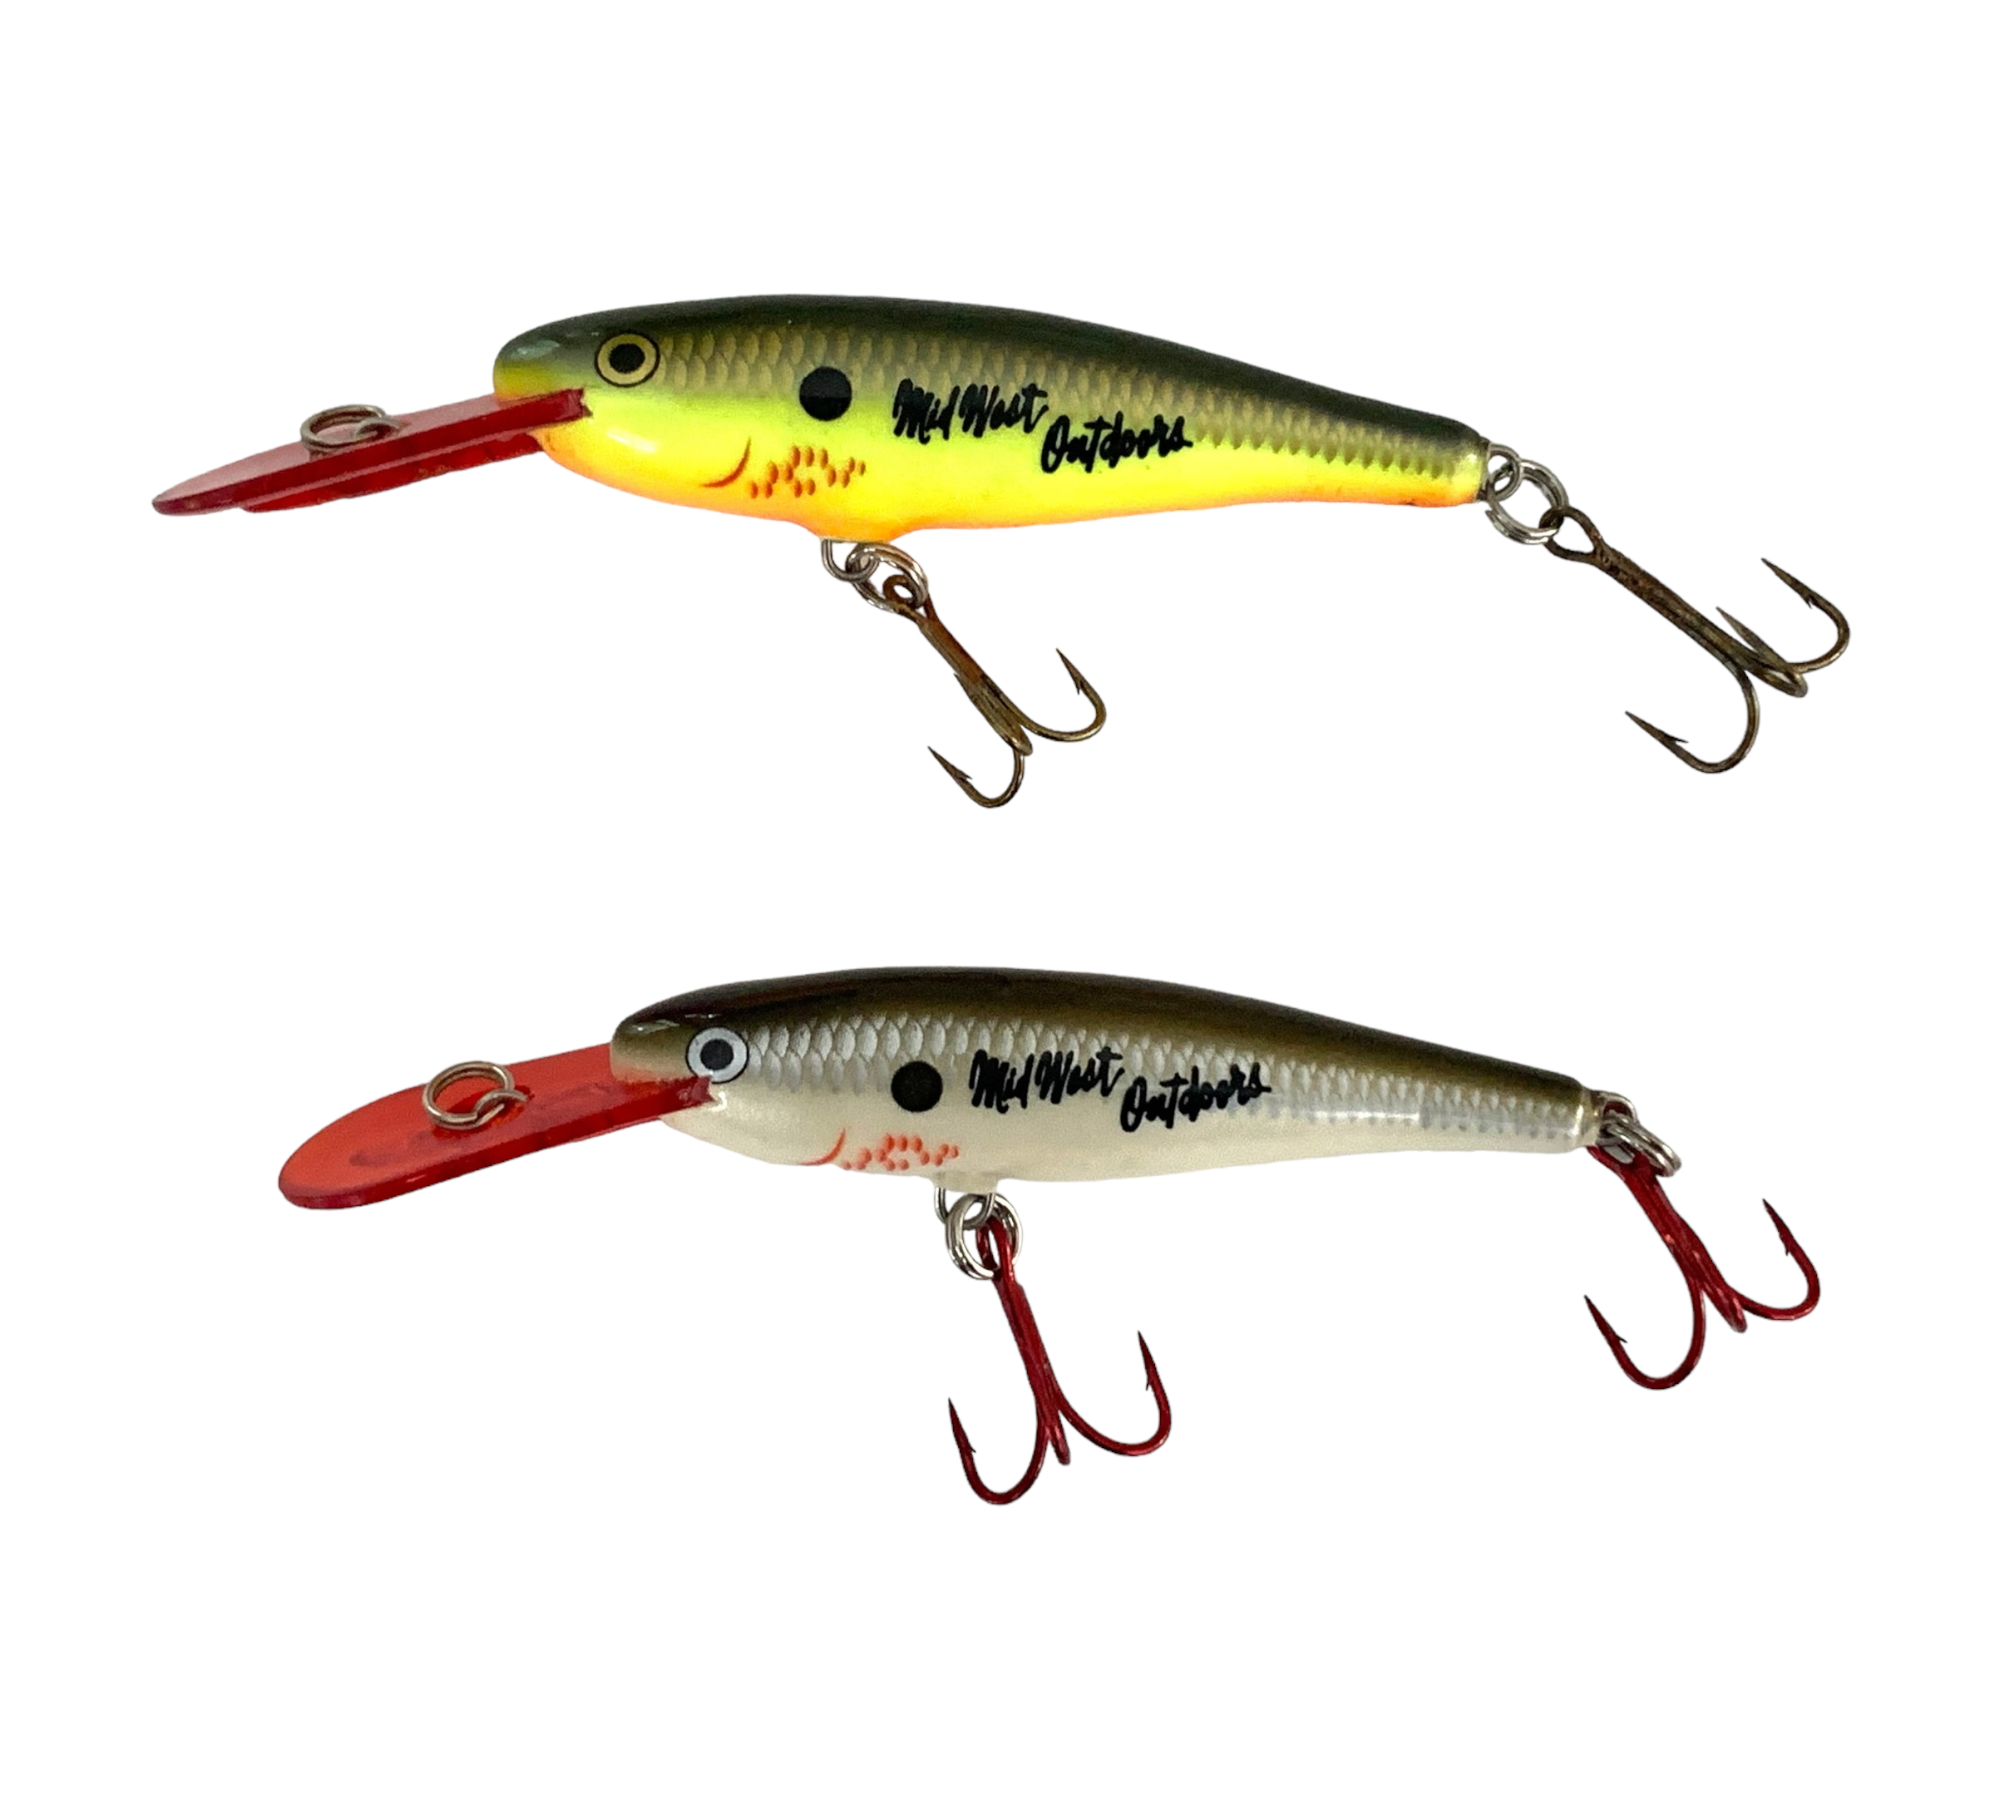 Lot of 2 RAPALA MINNOW RAP Fishing Lures • MIDWEST OUTDOORS – Toad